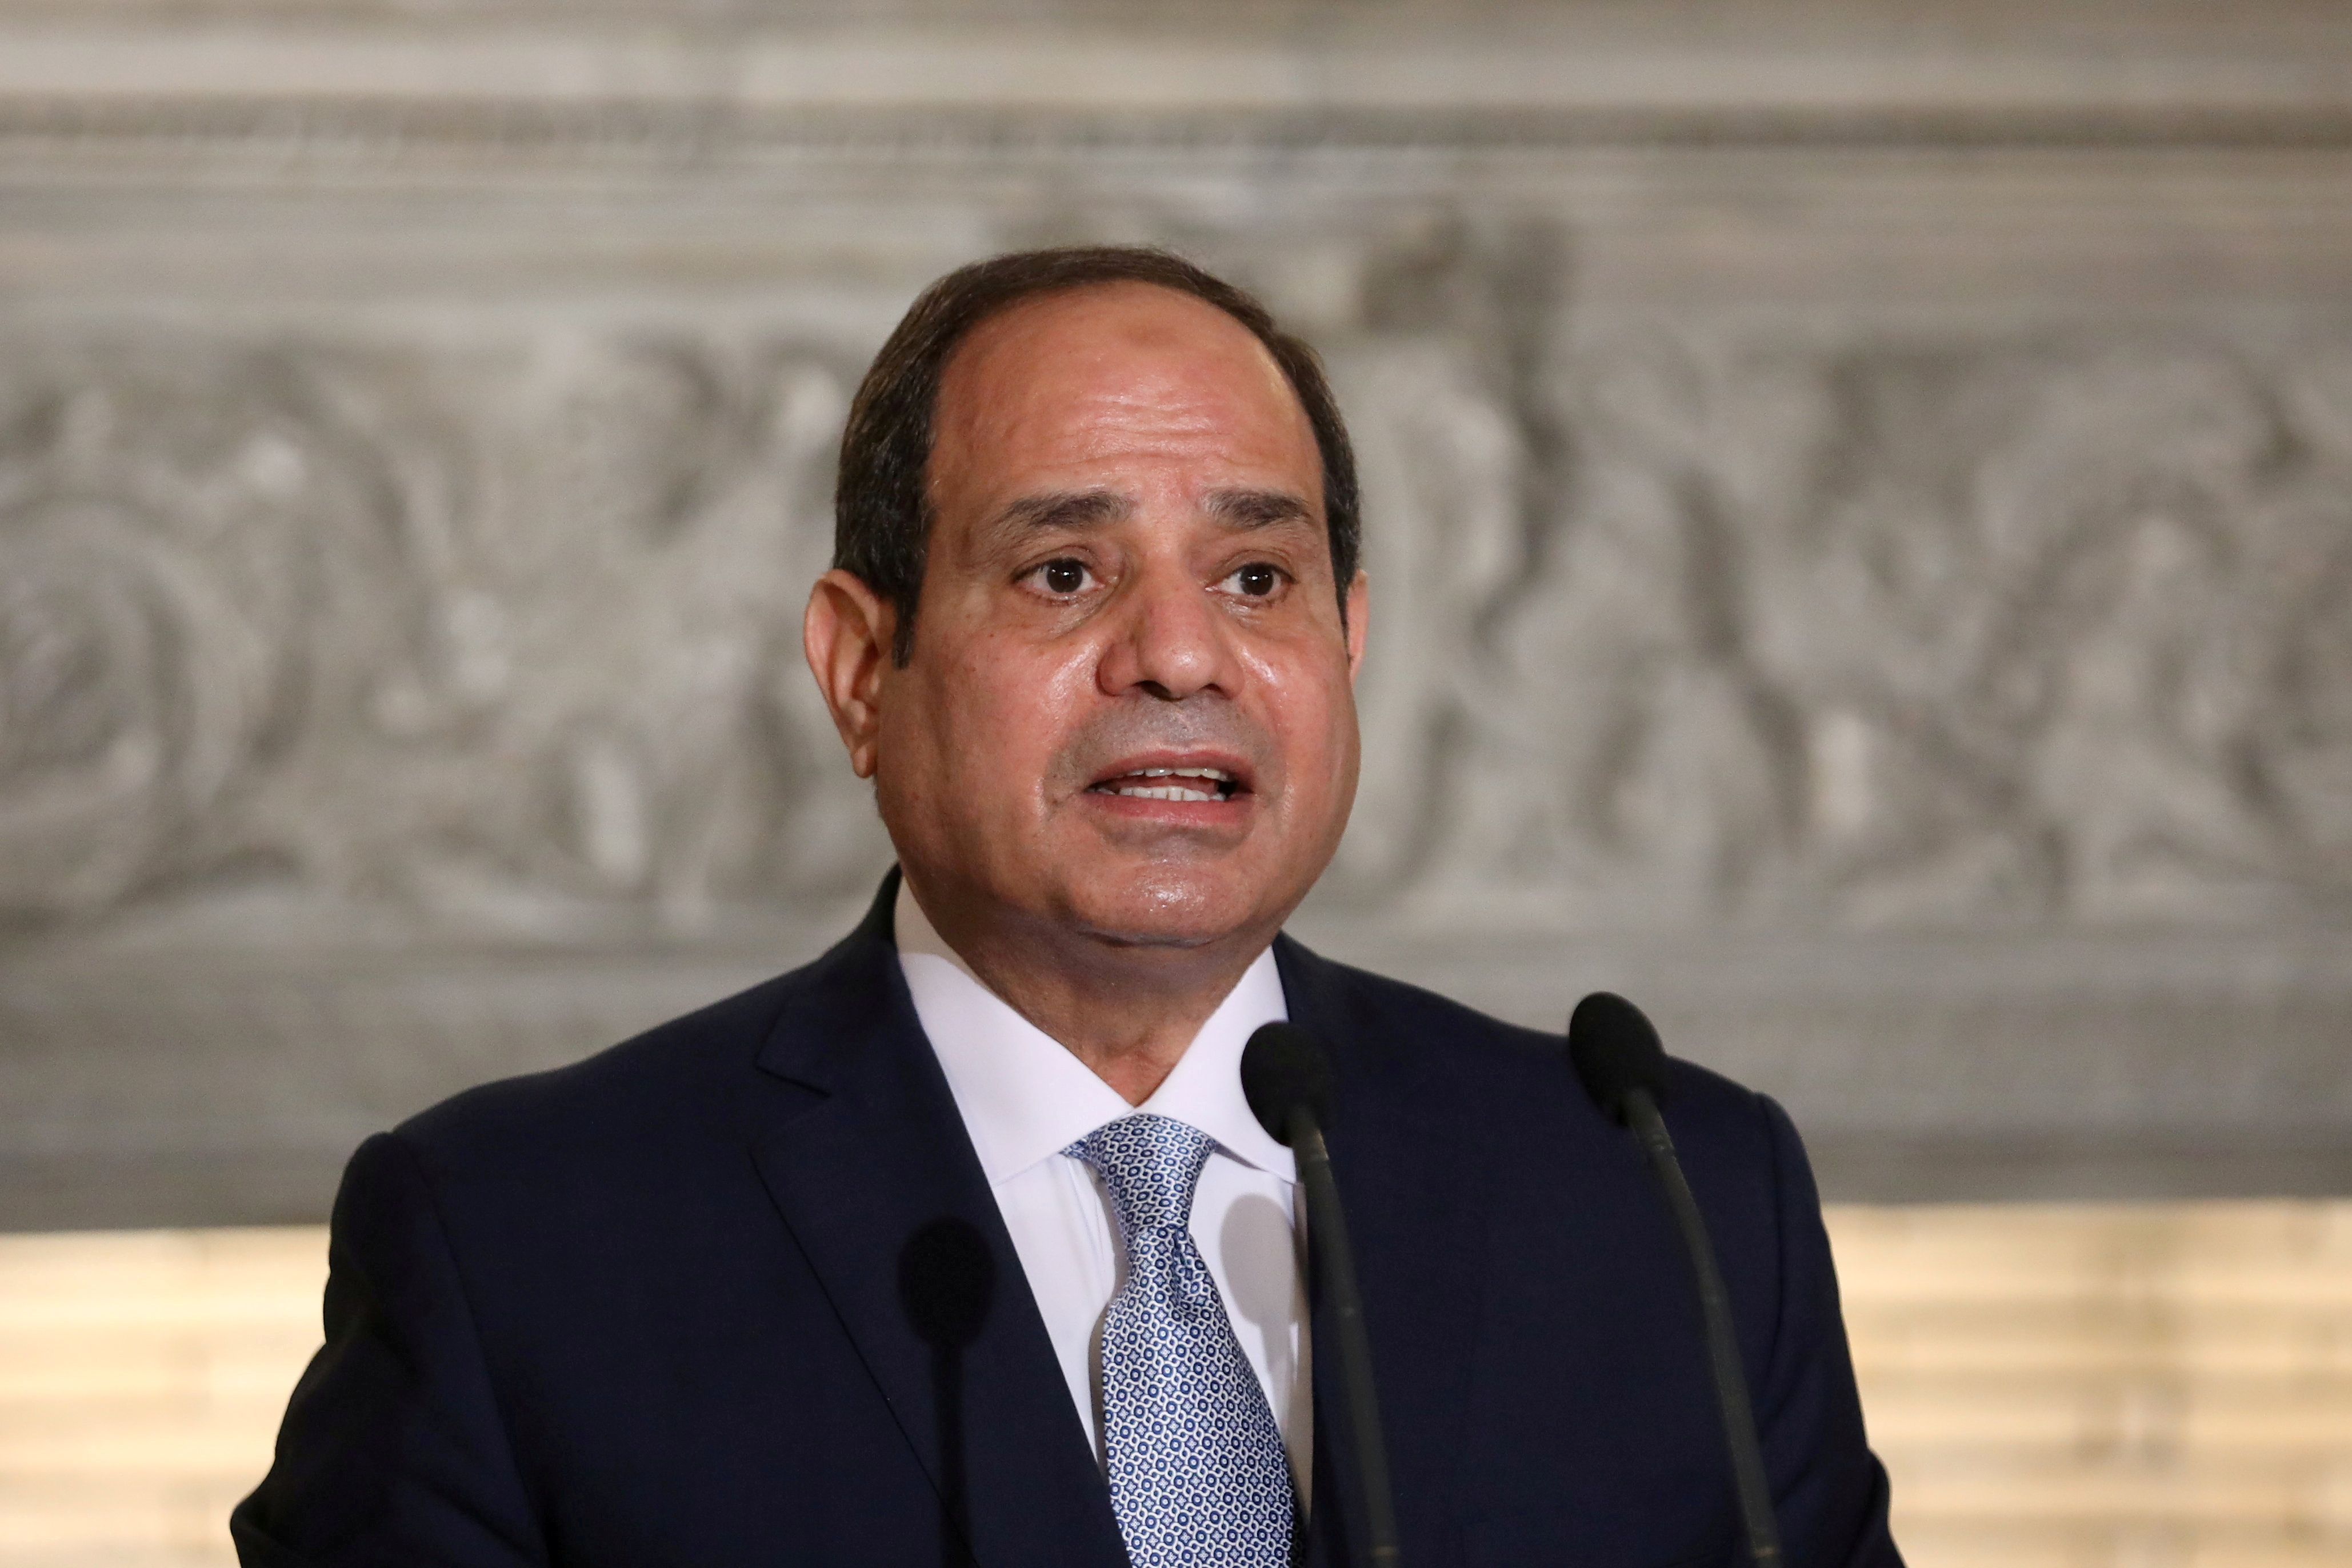 Egyptian President Abdel Fattah al-Sisi speaks at a news conference during a viist to Athens, Greece